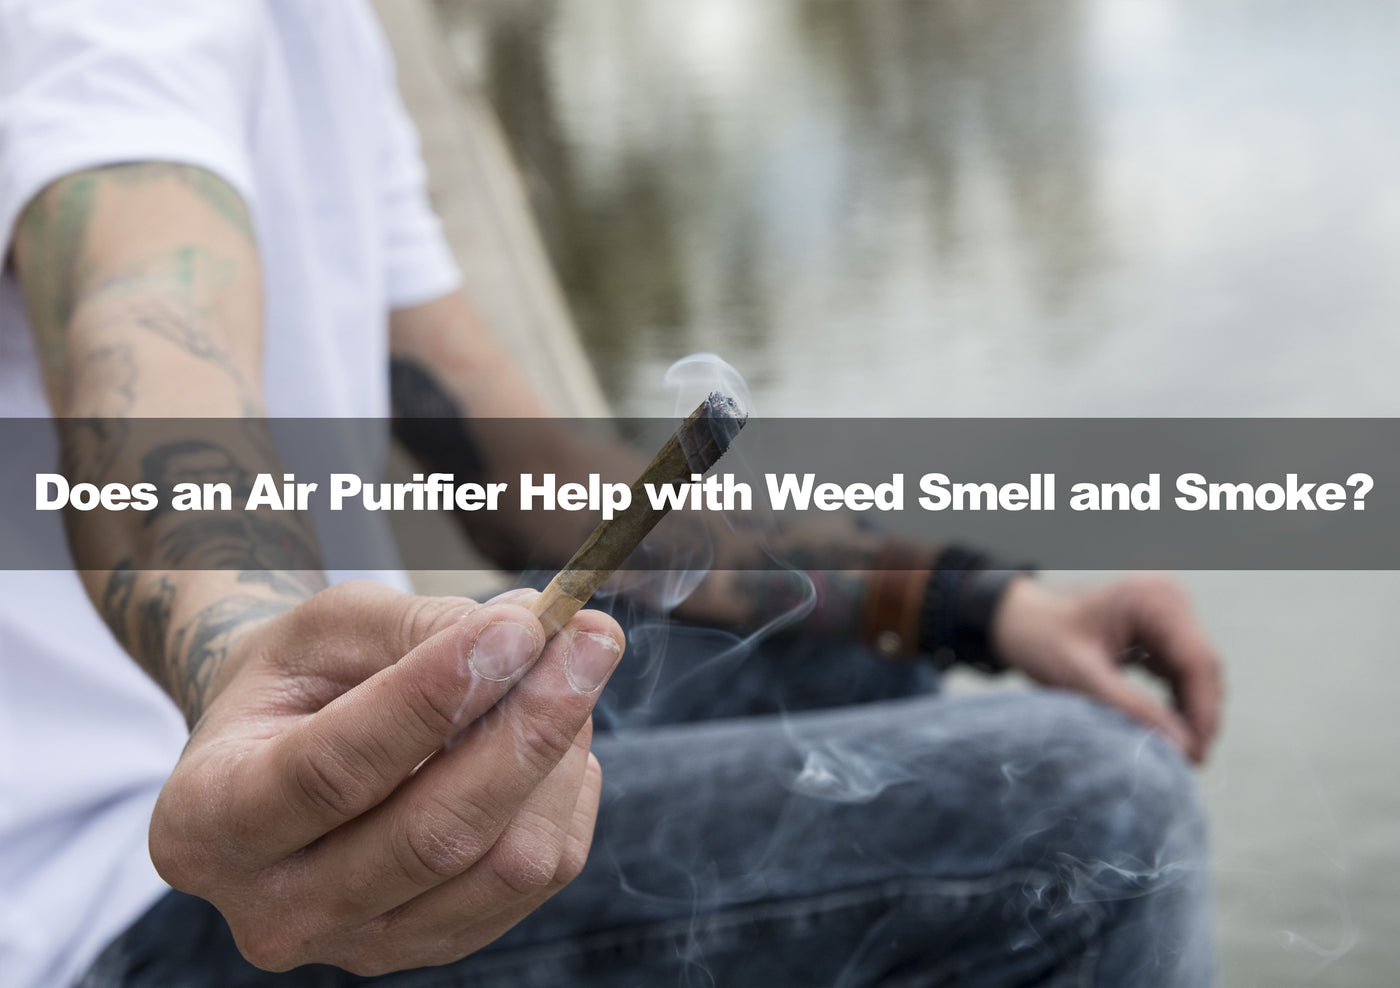 Does an Air Purifier Help with Weed Smell and Smoke